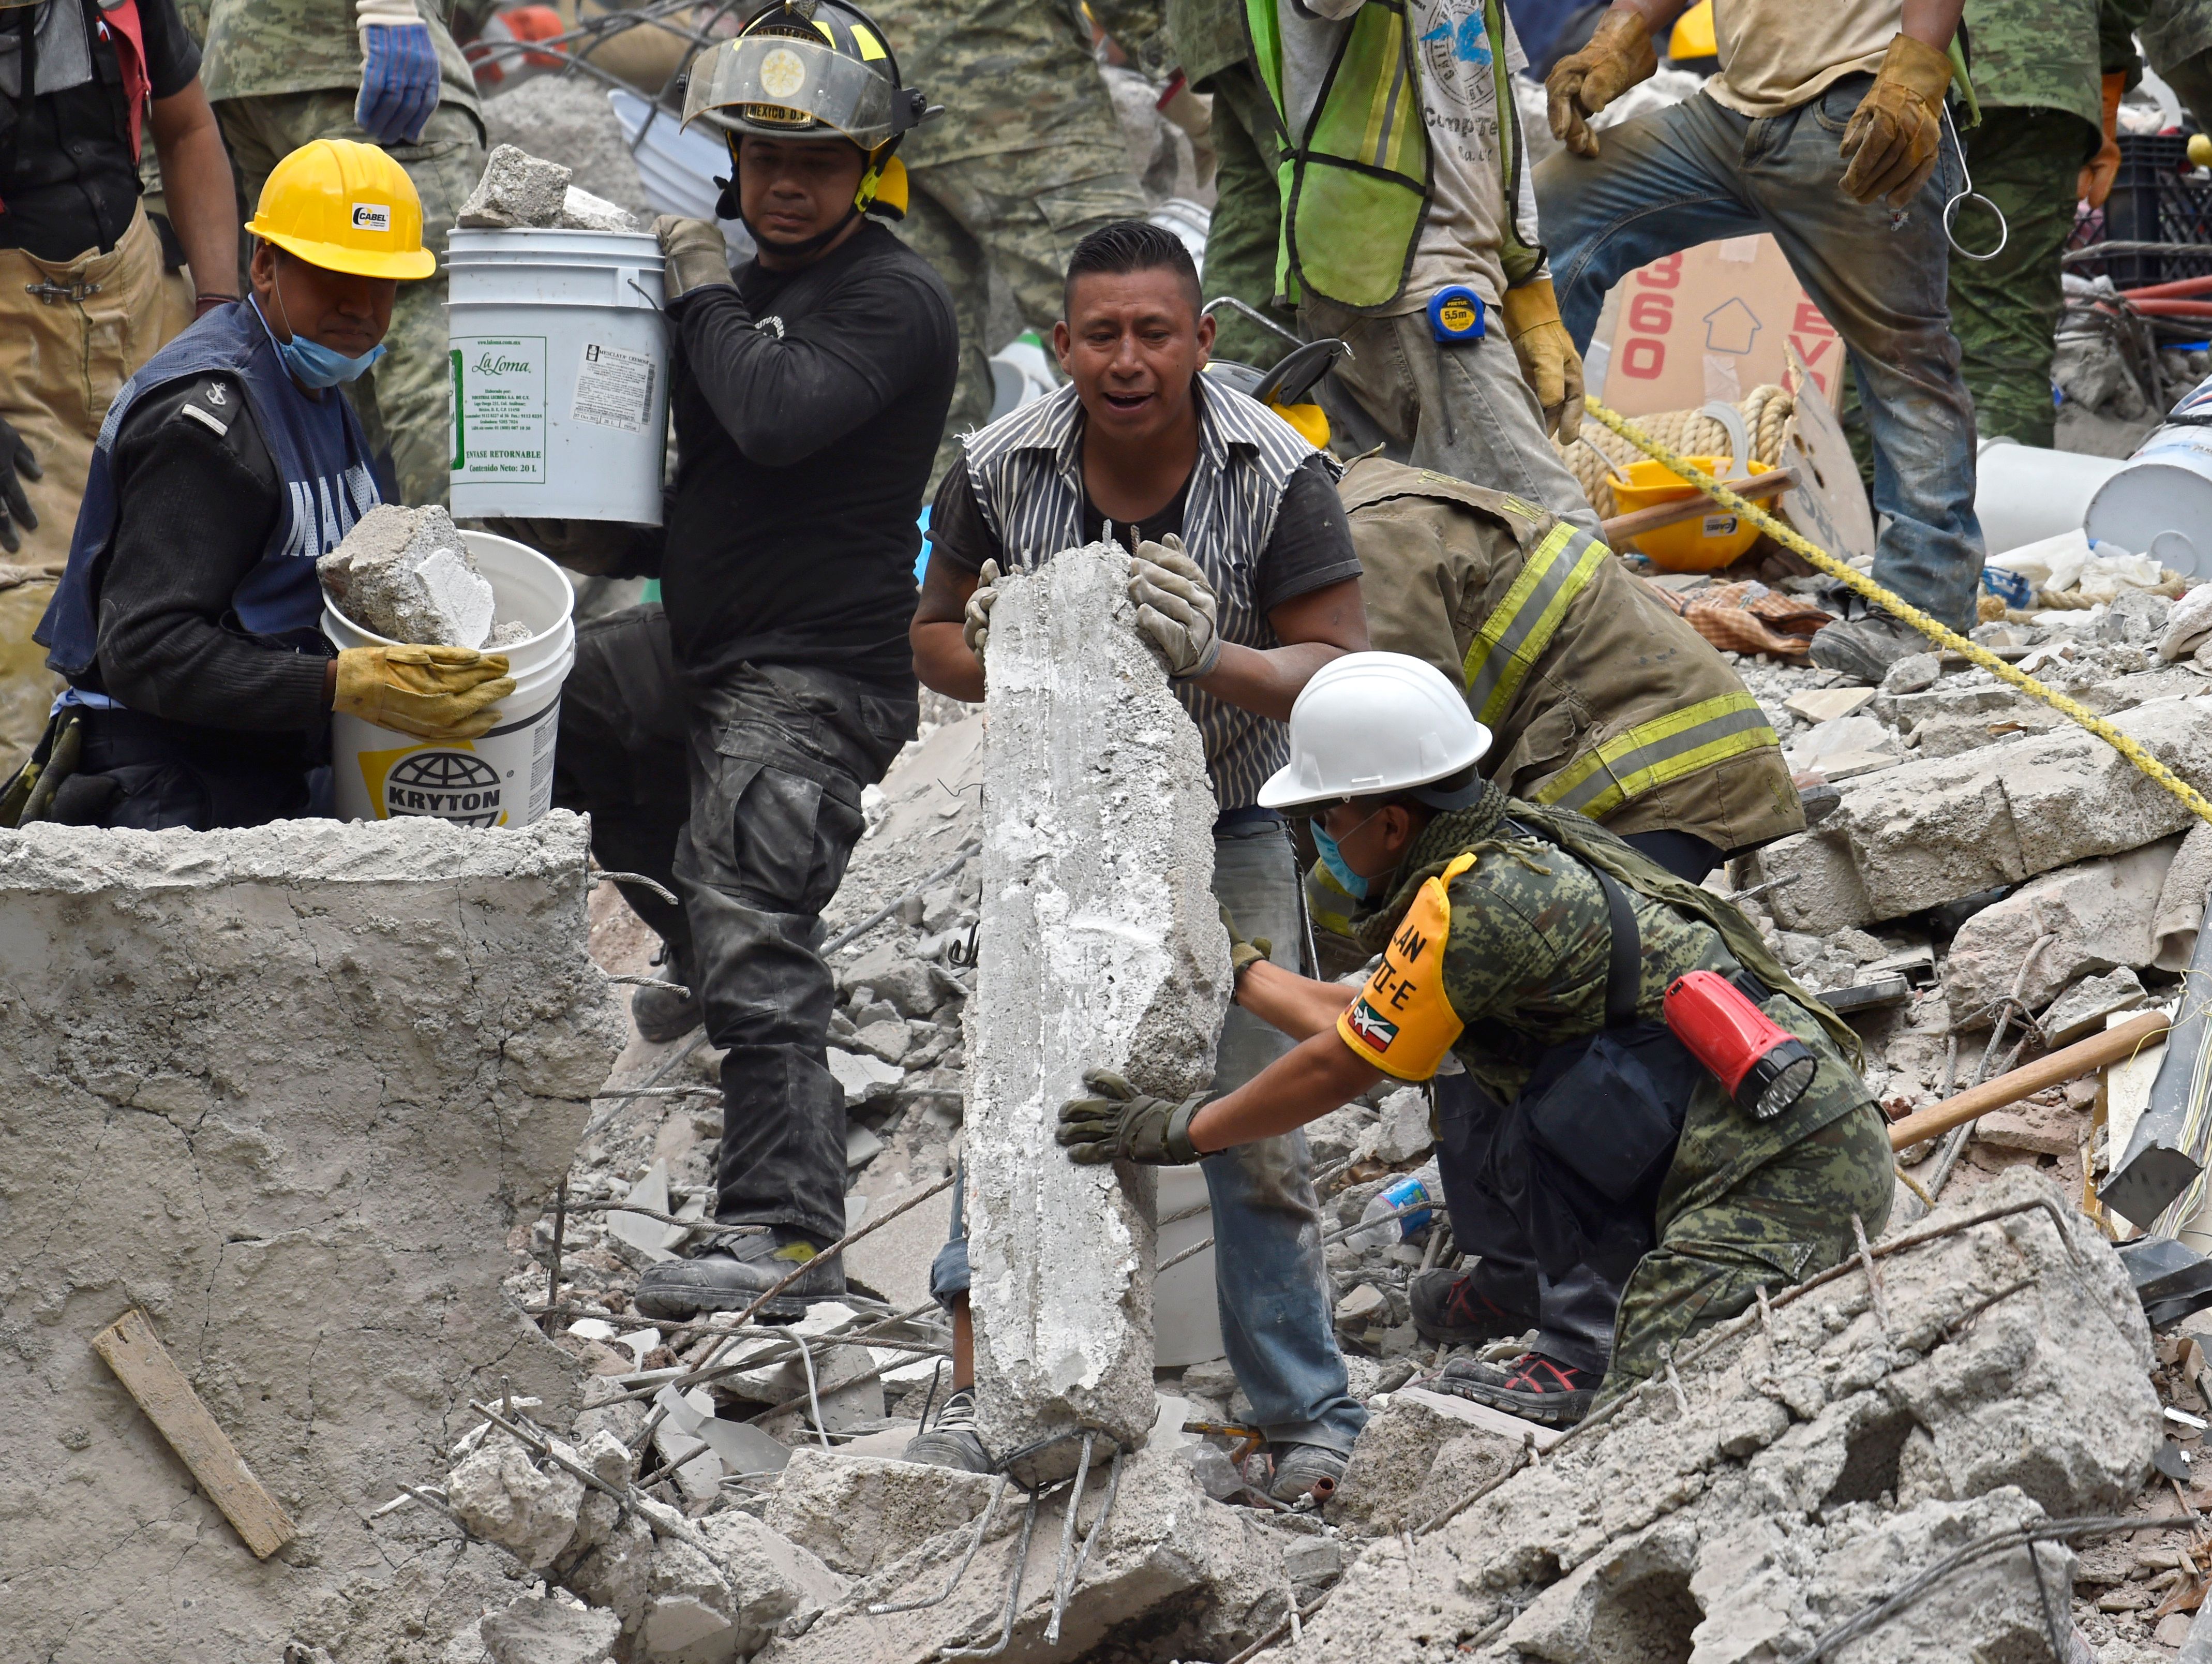 A marine, a firefighter, a volunteer and a soldier work together in the removal of debris of a flattened building in Mexico City on September 20, 2017 as the search for survivors continues a day after a strong quake hit central Mexico. A powerful 7.1 earthquake shook Mexico City on Tuesday, causing panic among the megalopolis' 20 million inhabitants on the 32nd anniversary of a devastating 1985 quake. / AFP PHOTO / Pedro PARDO (Photo credit should read PEDRO PARDO/AFP/Getty Images)